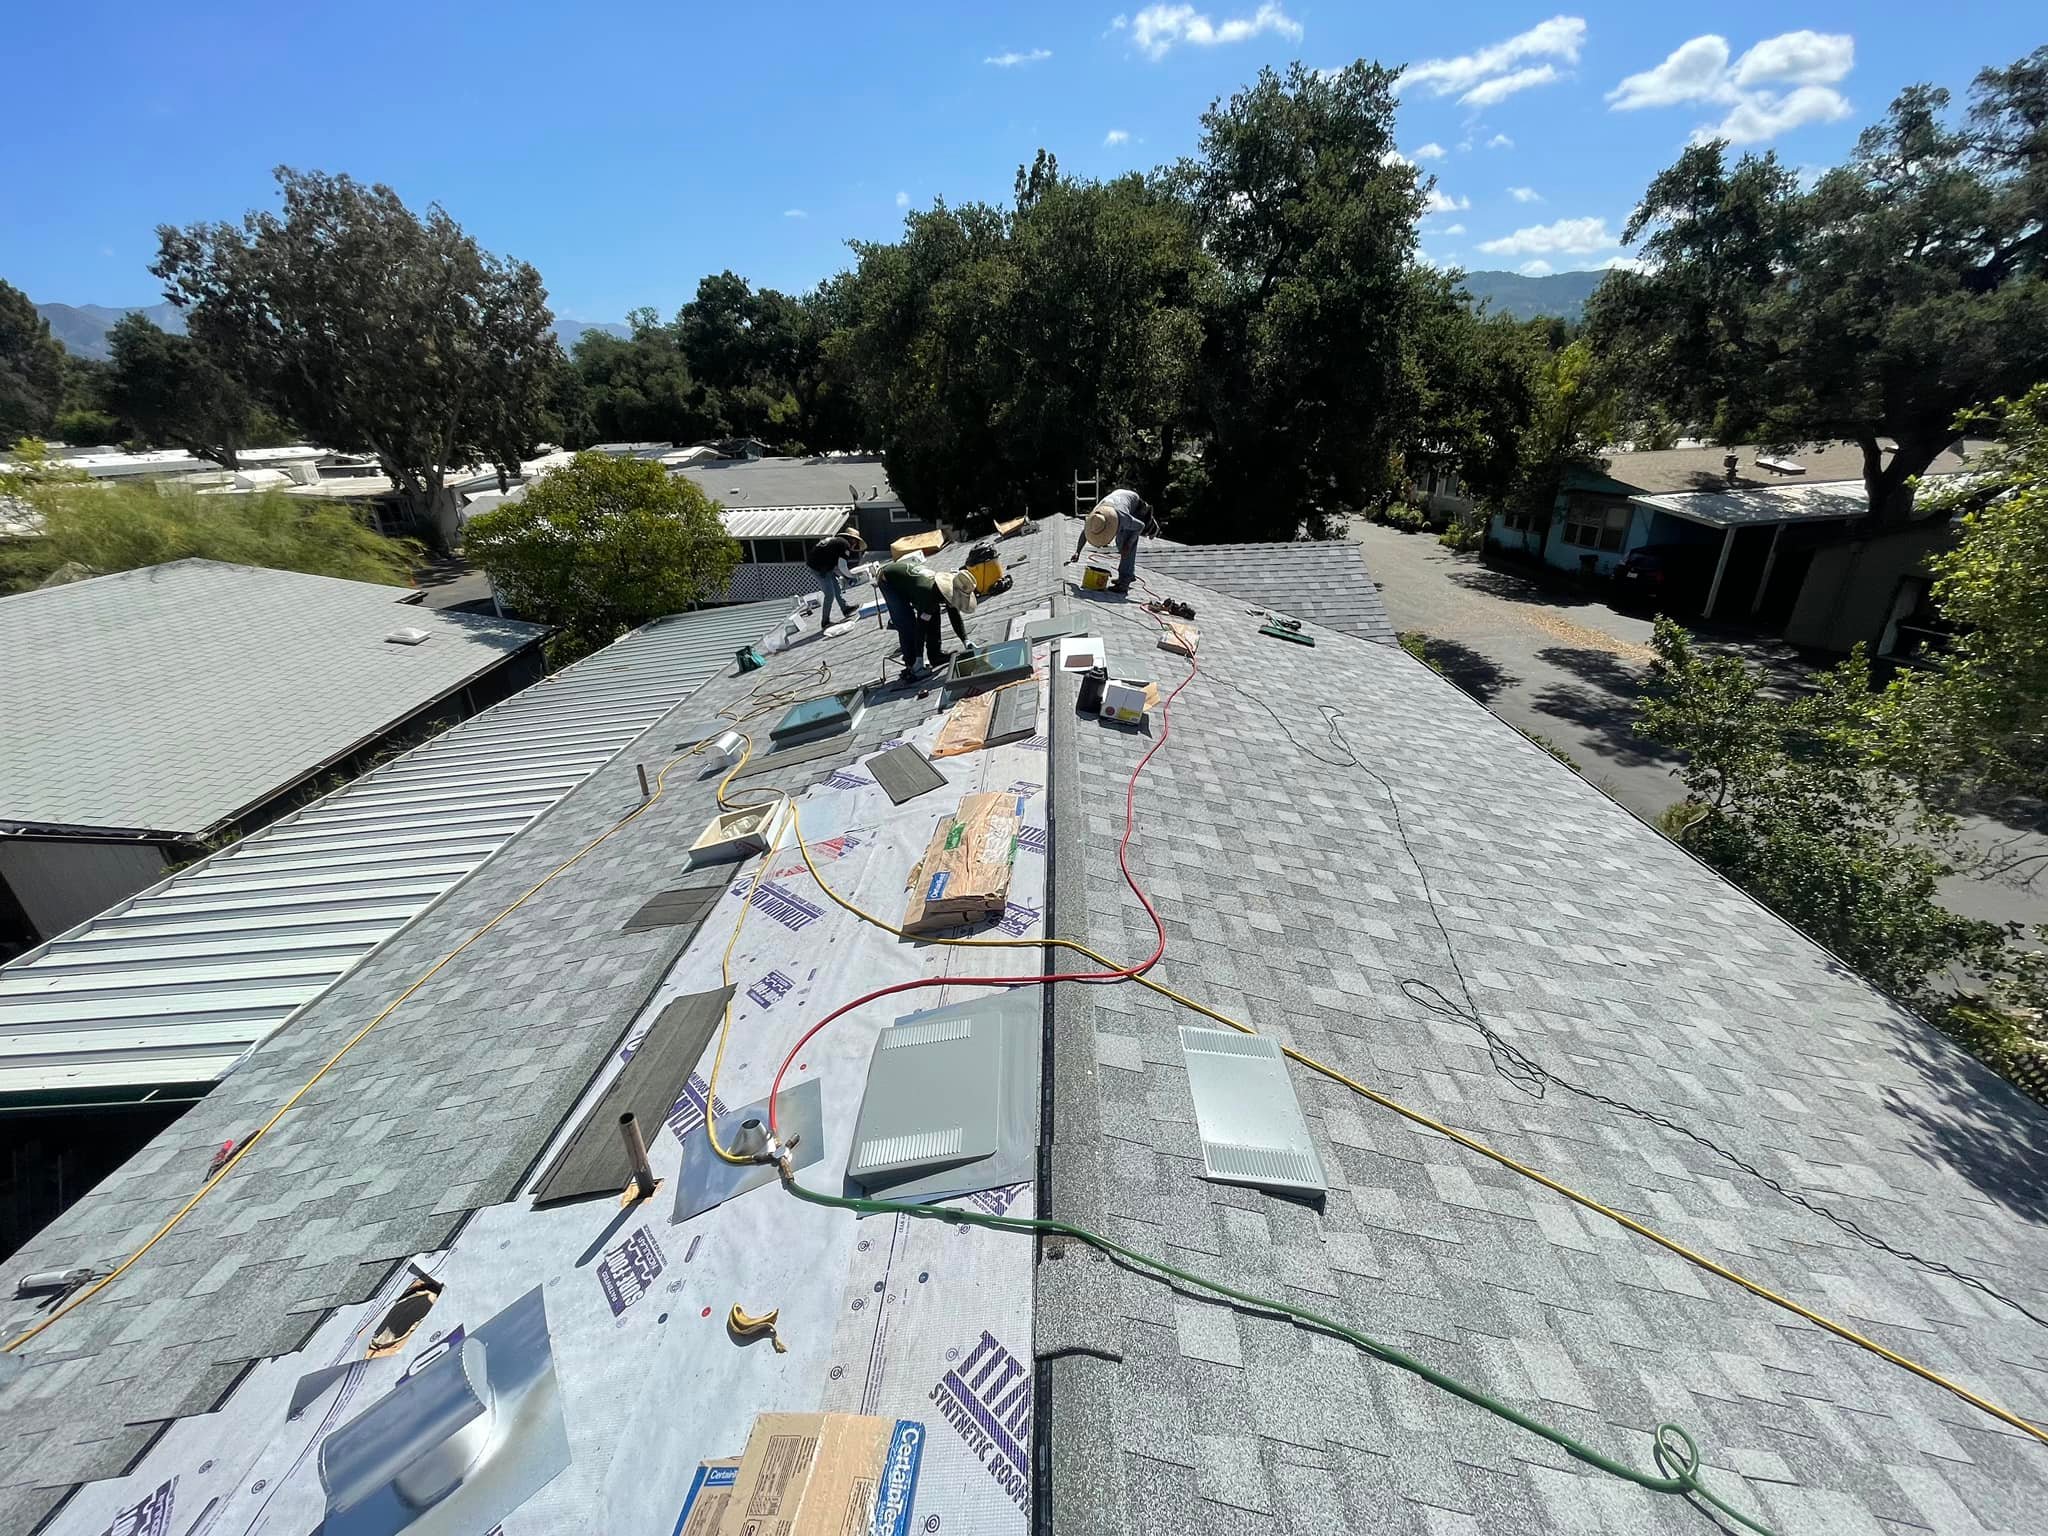 roofing contractors installing shingle roof after homeowners asking how much does it cost to replace a shingle roof